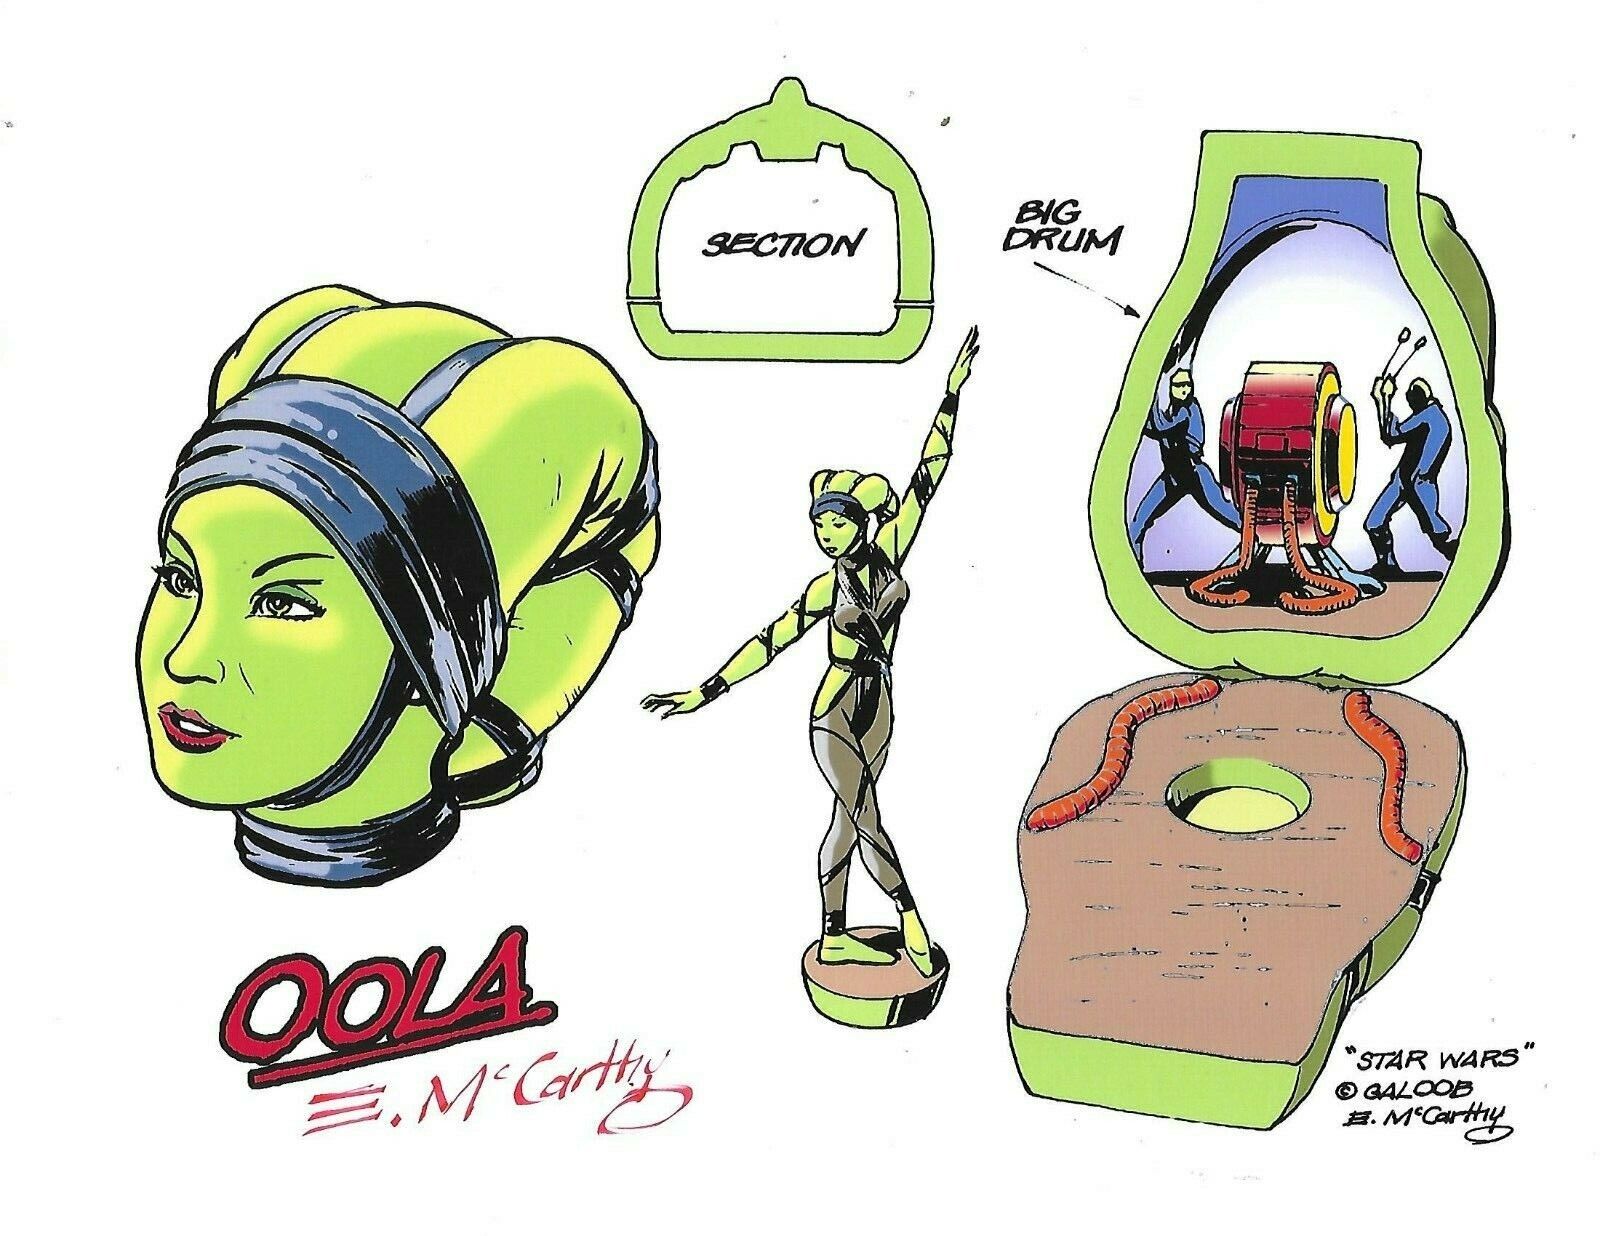 STAR WARS Oola & Big Drum GALOOB X-Section Color Guide Poster SIGNED E. McCarthy